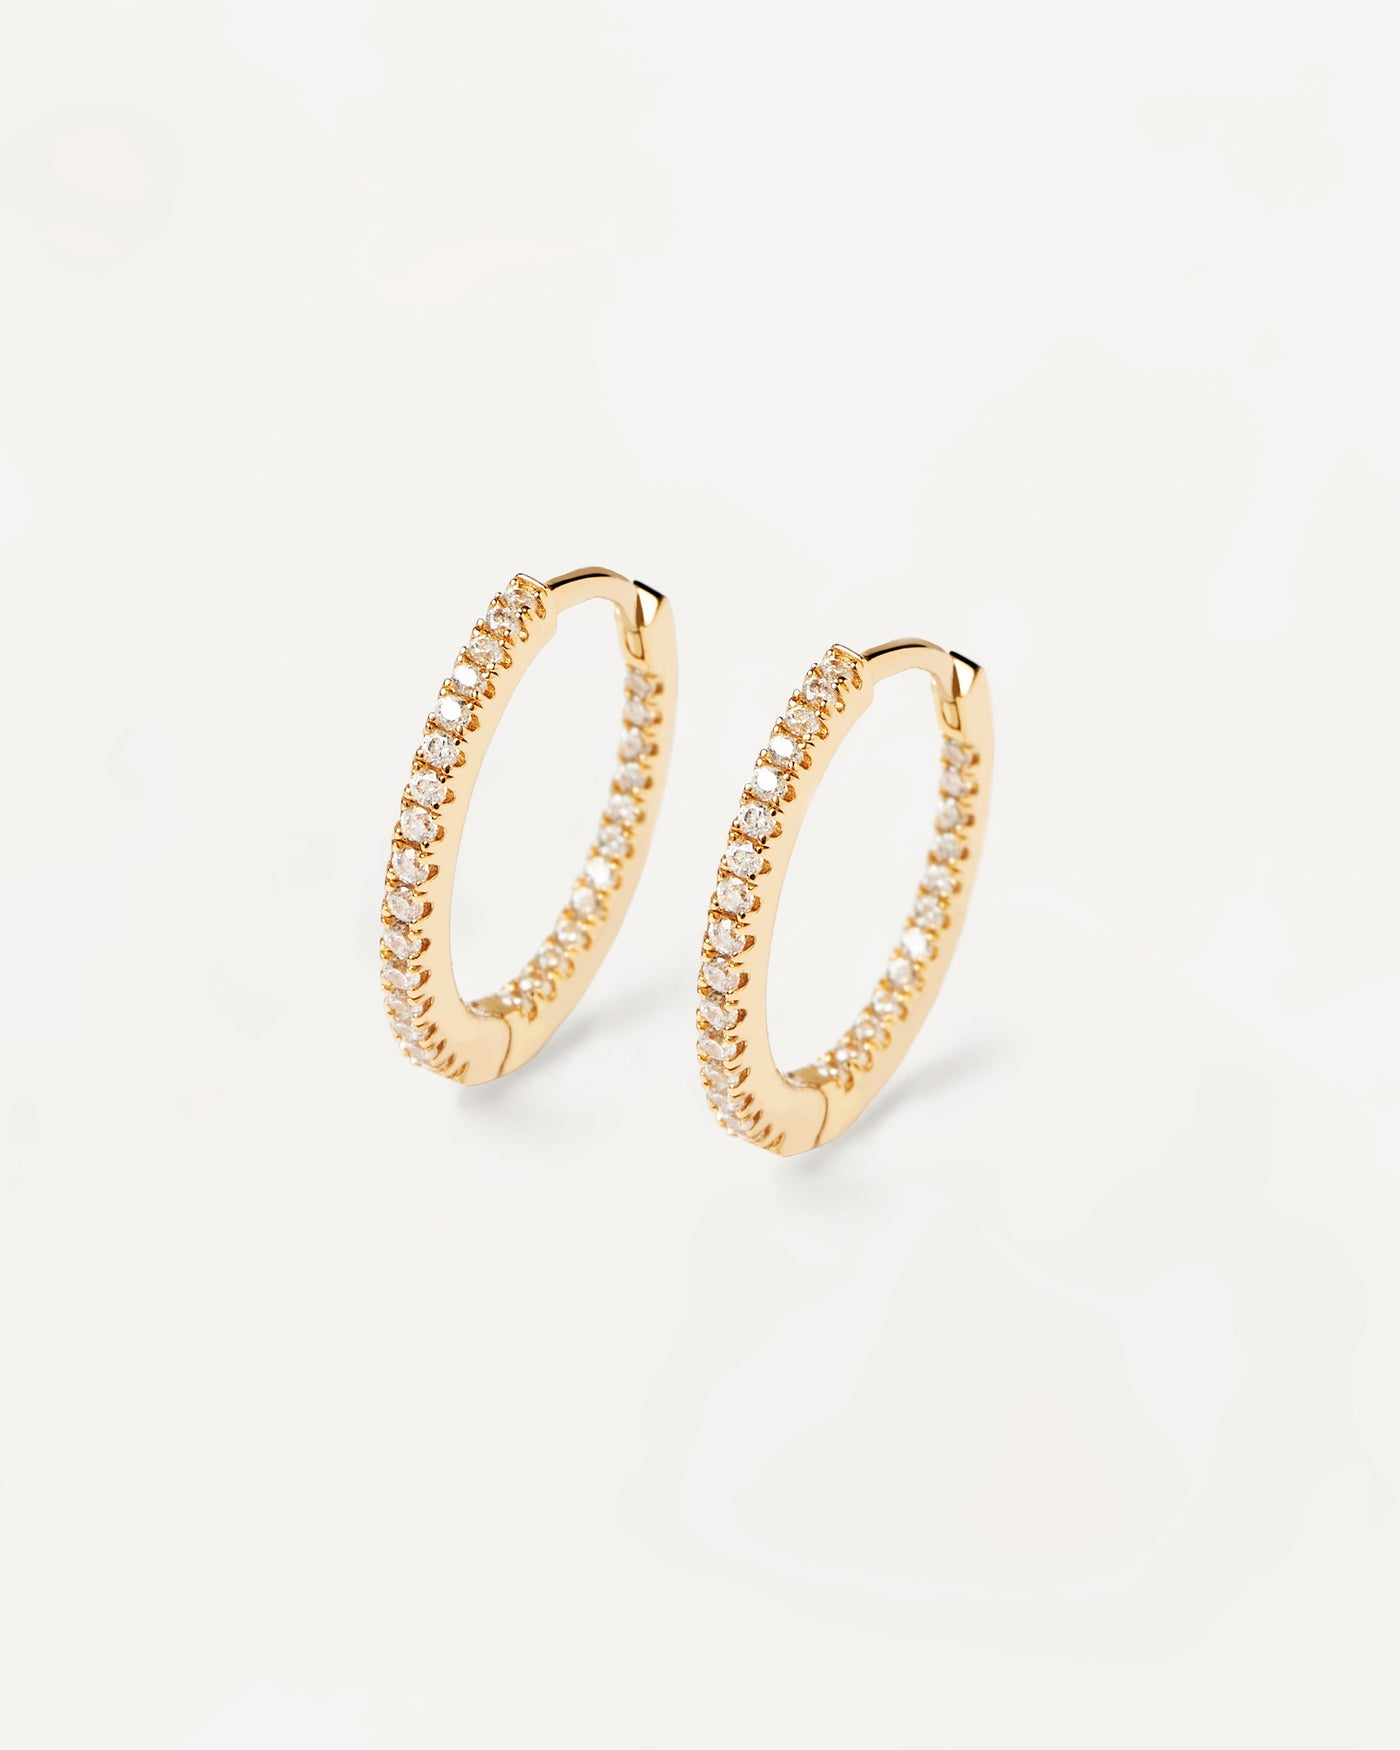 2023 Selection | White Medium Hoops. Full hoop latch-back earrings in 18k gold plated silver set with white zirconia. Get the latest arrival from PDPAOLA. Place your order safely and get this Best Seller. Free Shipping.